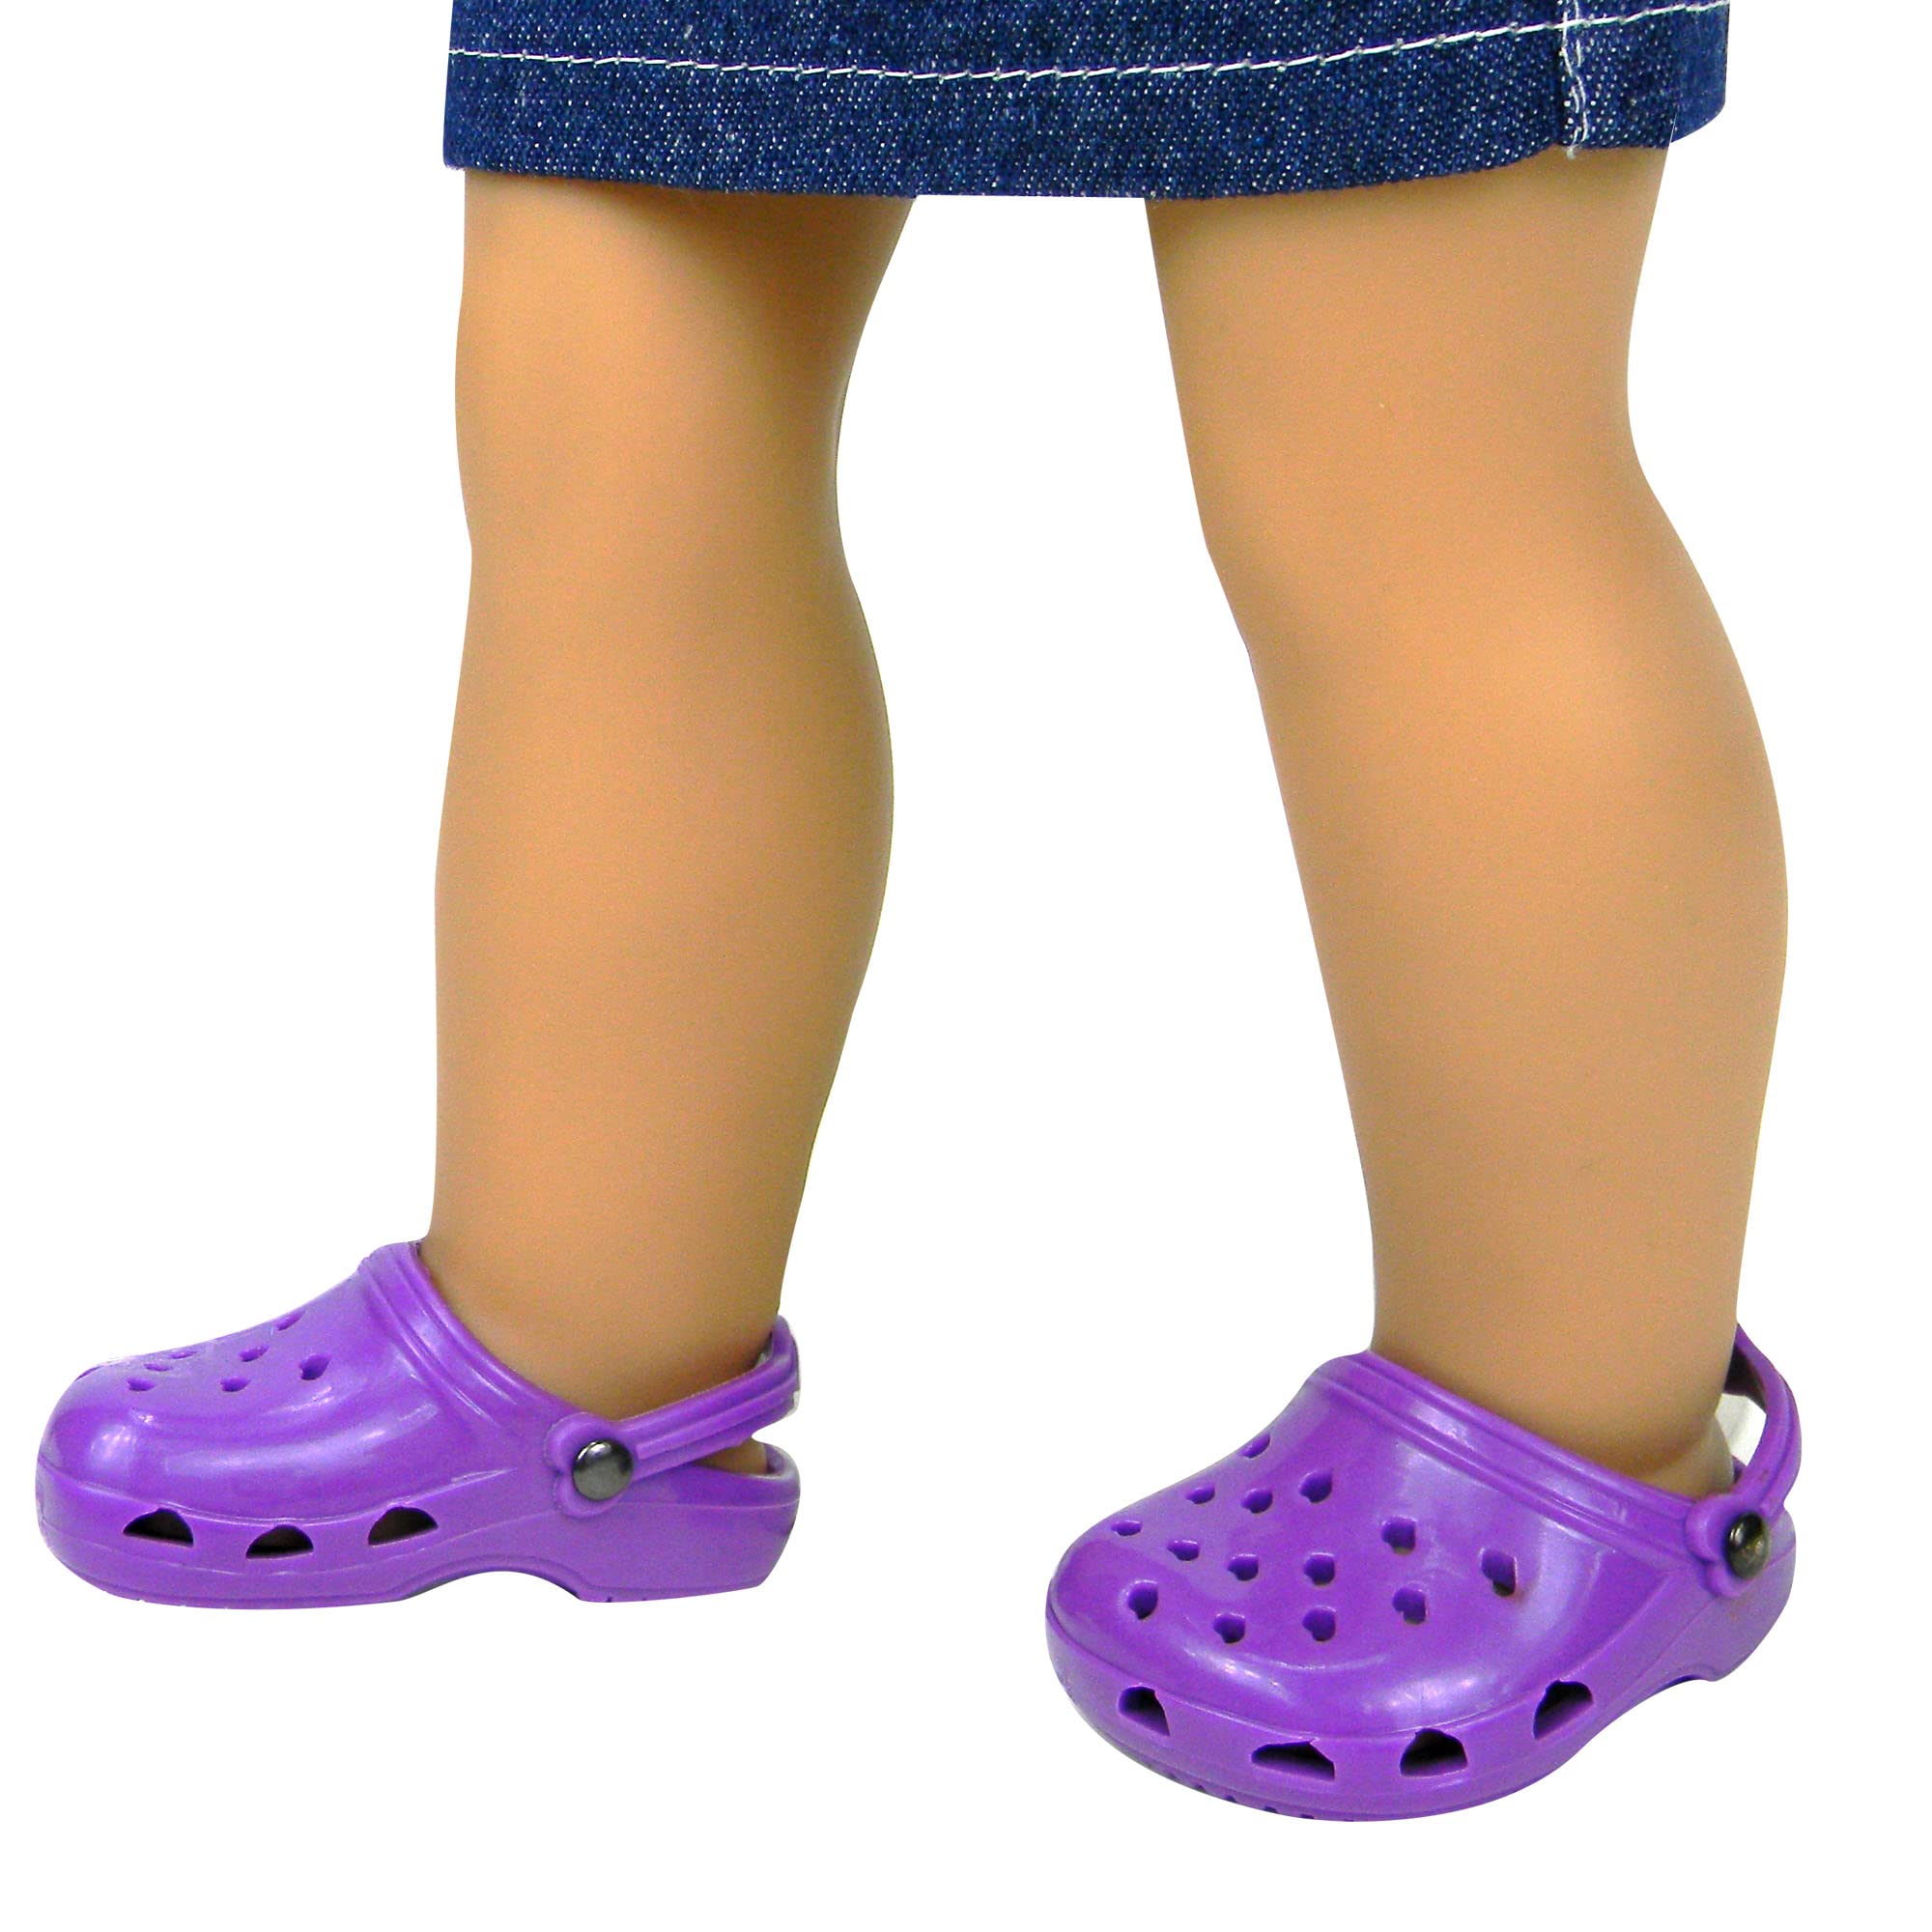 Sophia's 18" Doll Set of Two Comfy Polliwog Garden Clog Shoes in Teal and Purple